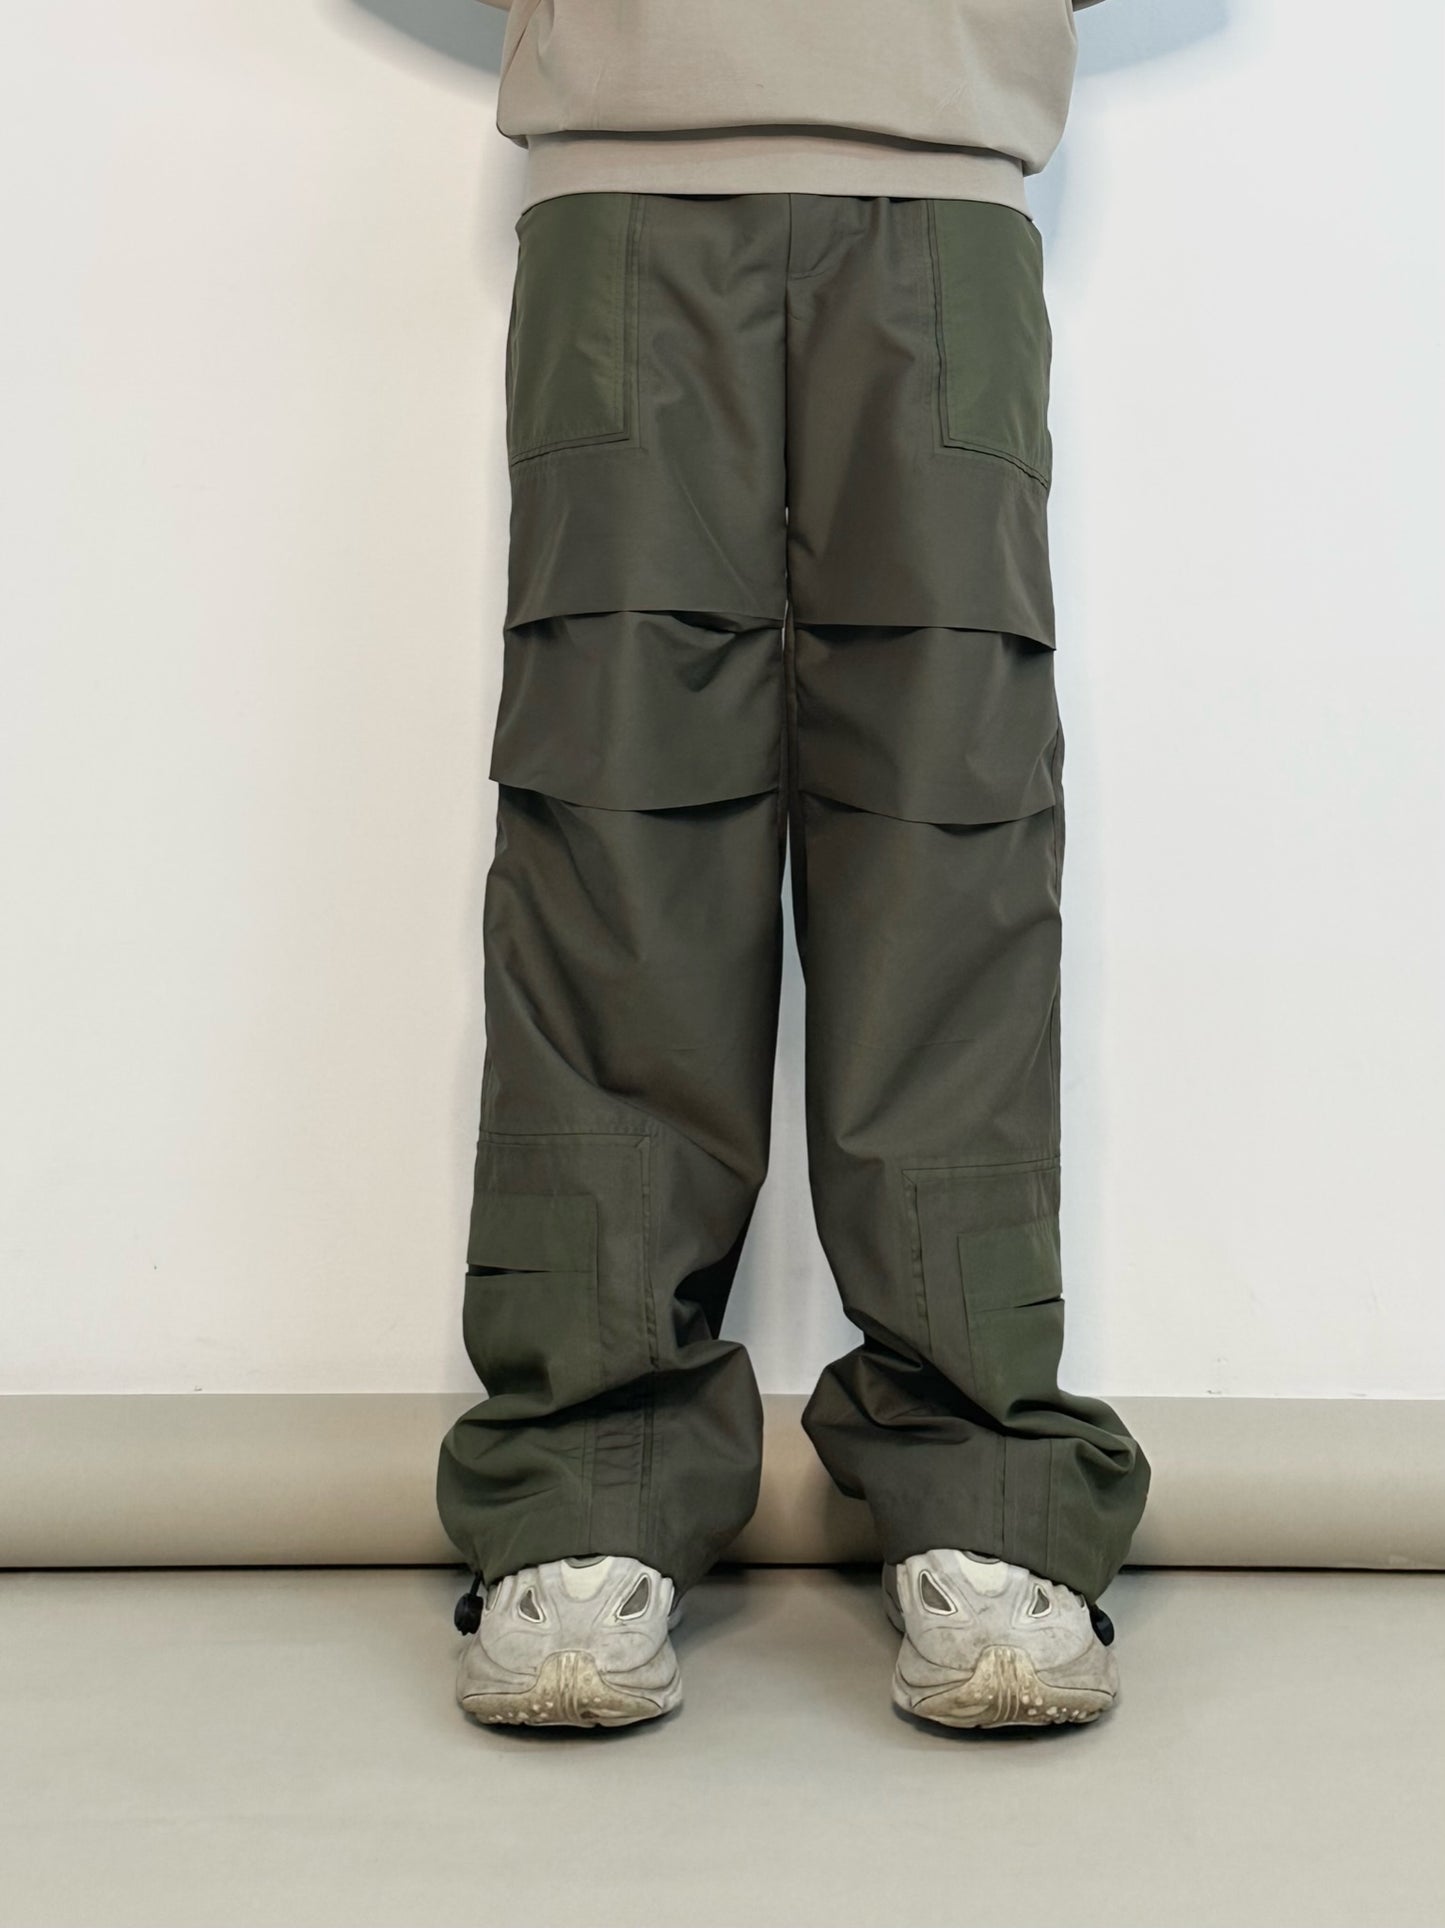 parachute pants, cut and sew, mens parachute pants, mens streetwear style, limited edition, warping theories, womenswear style, womens parachute pants, odark green parachute pants, cut and sew detailiing, cut and sew pants, summer colloection parachute pants, styling inspiration, people also ask 